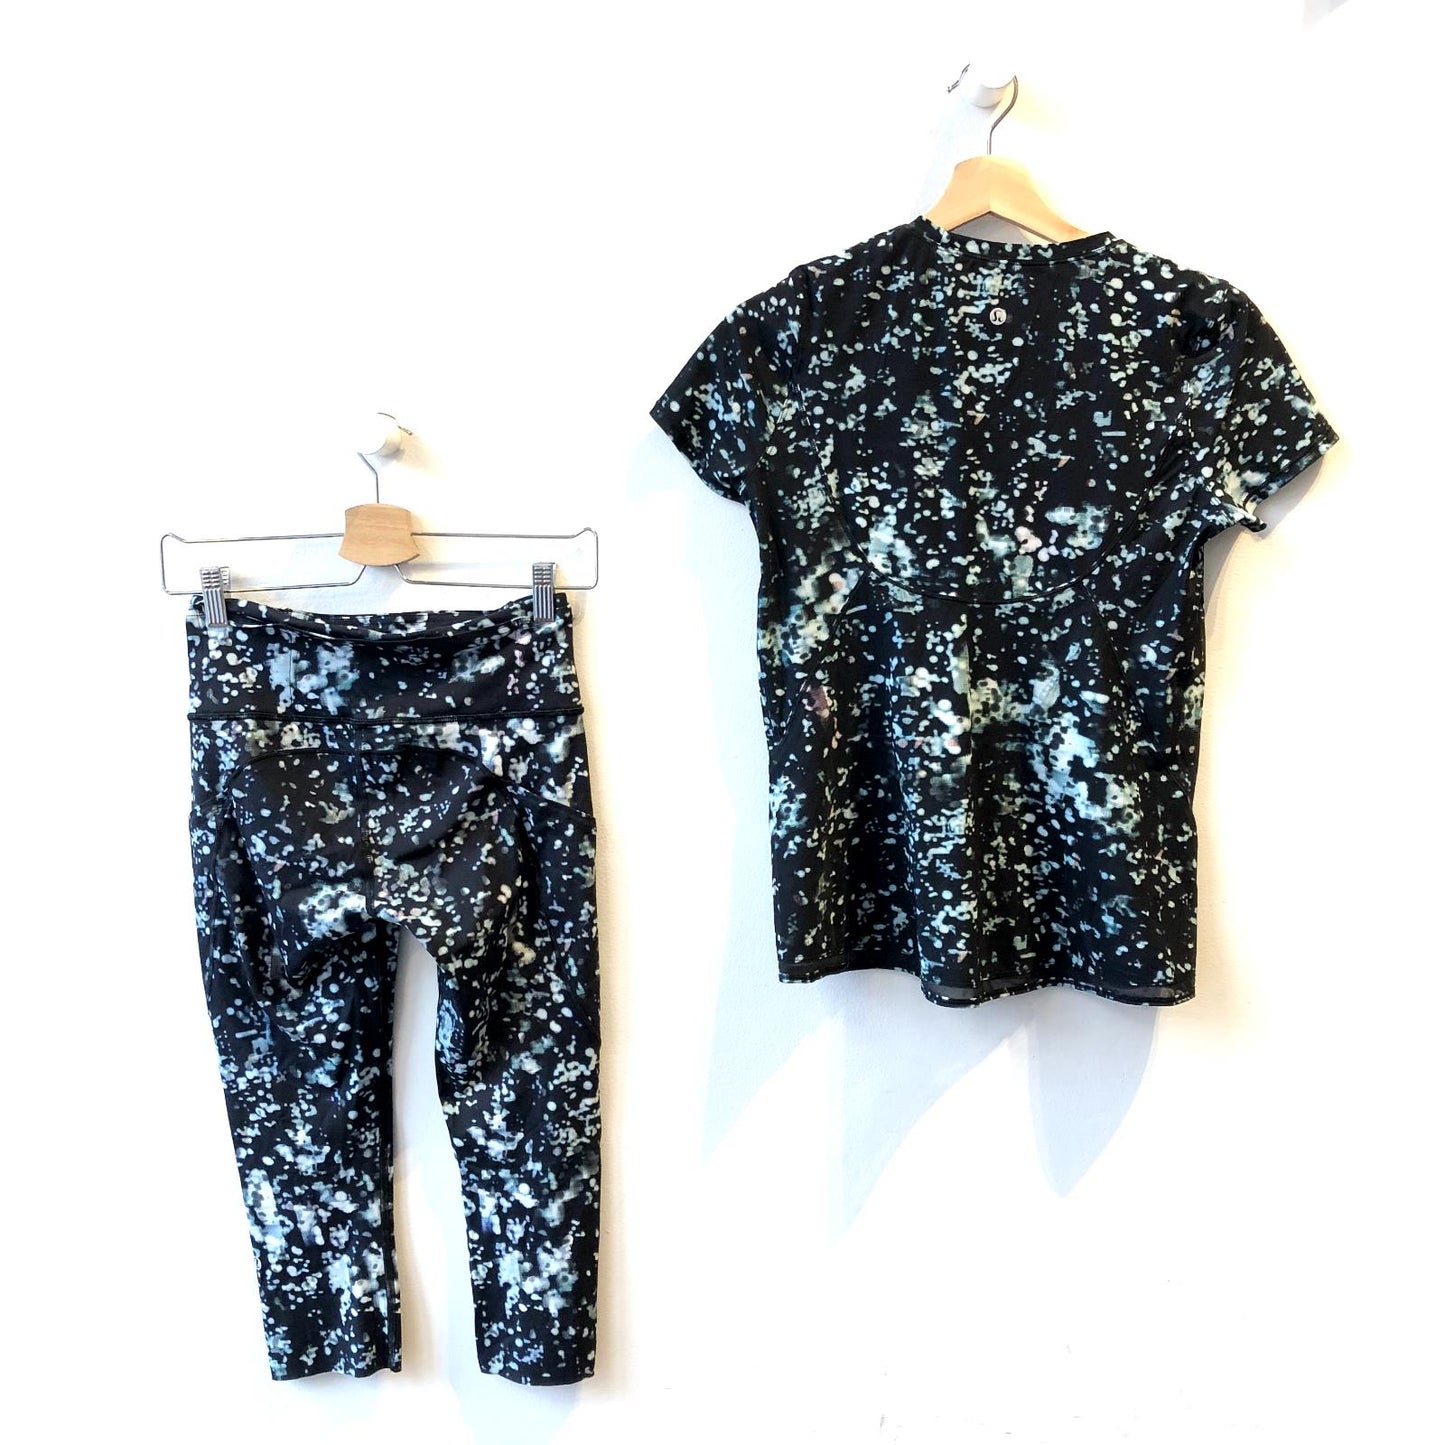 6 - Lululemon Black Speckled Patterned TWO PIECE Top & Pants Outfit Set 0614CF